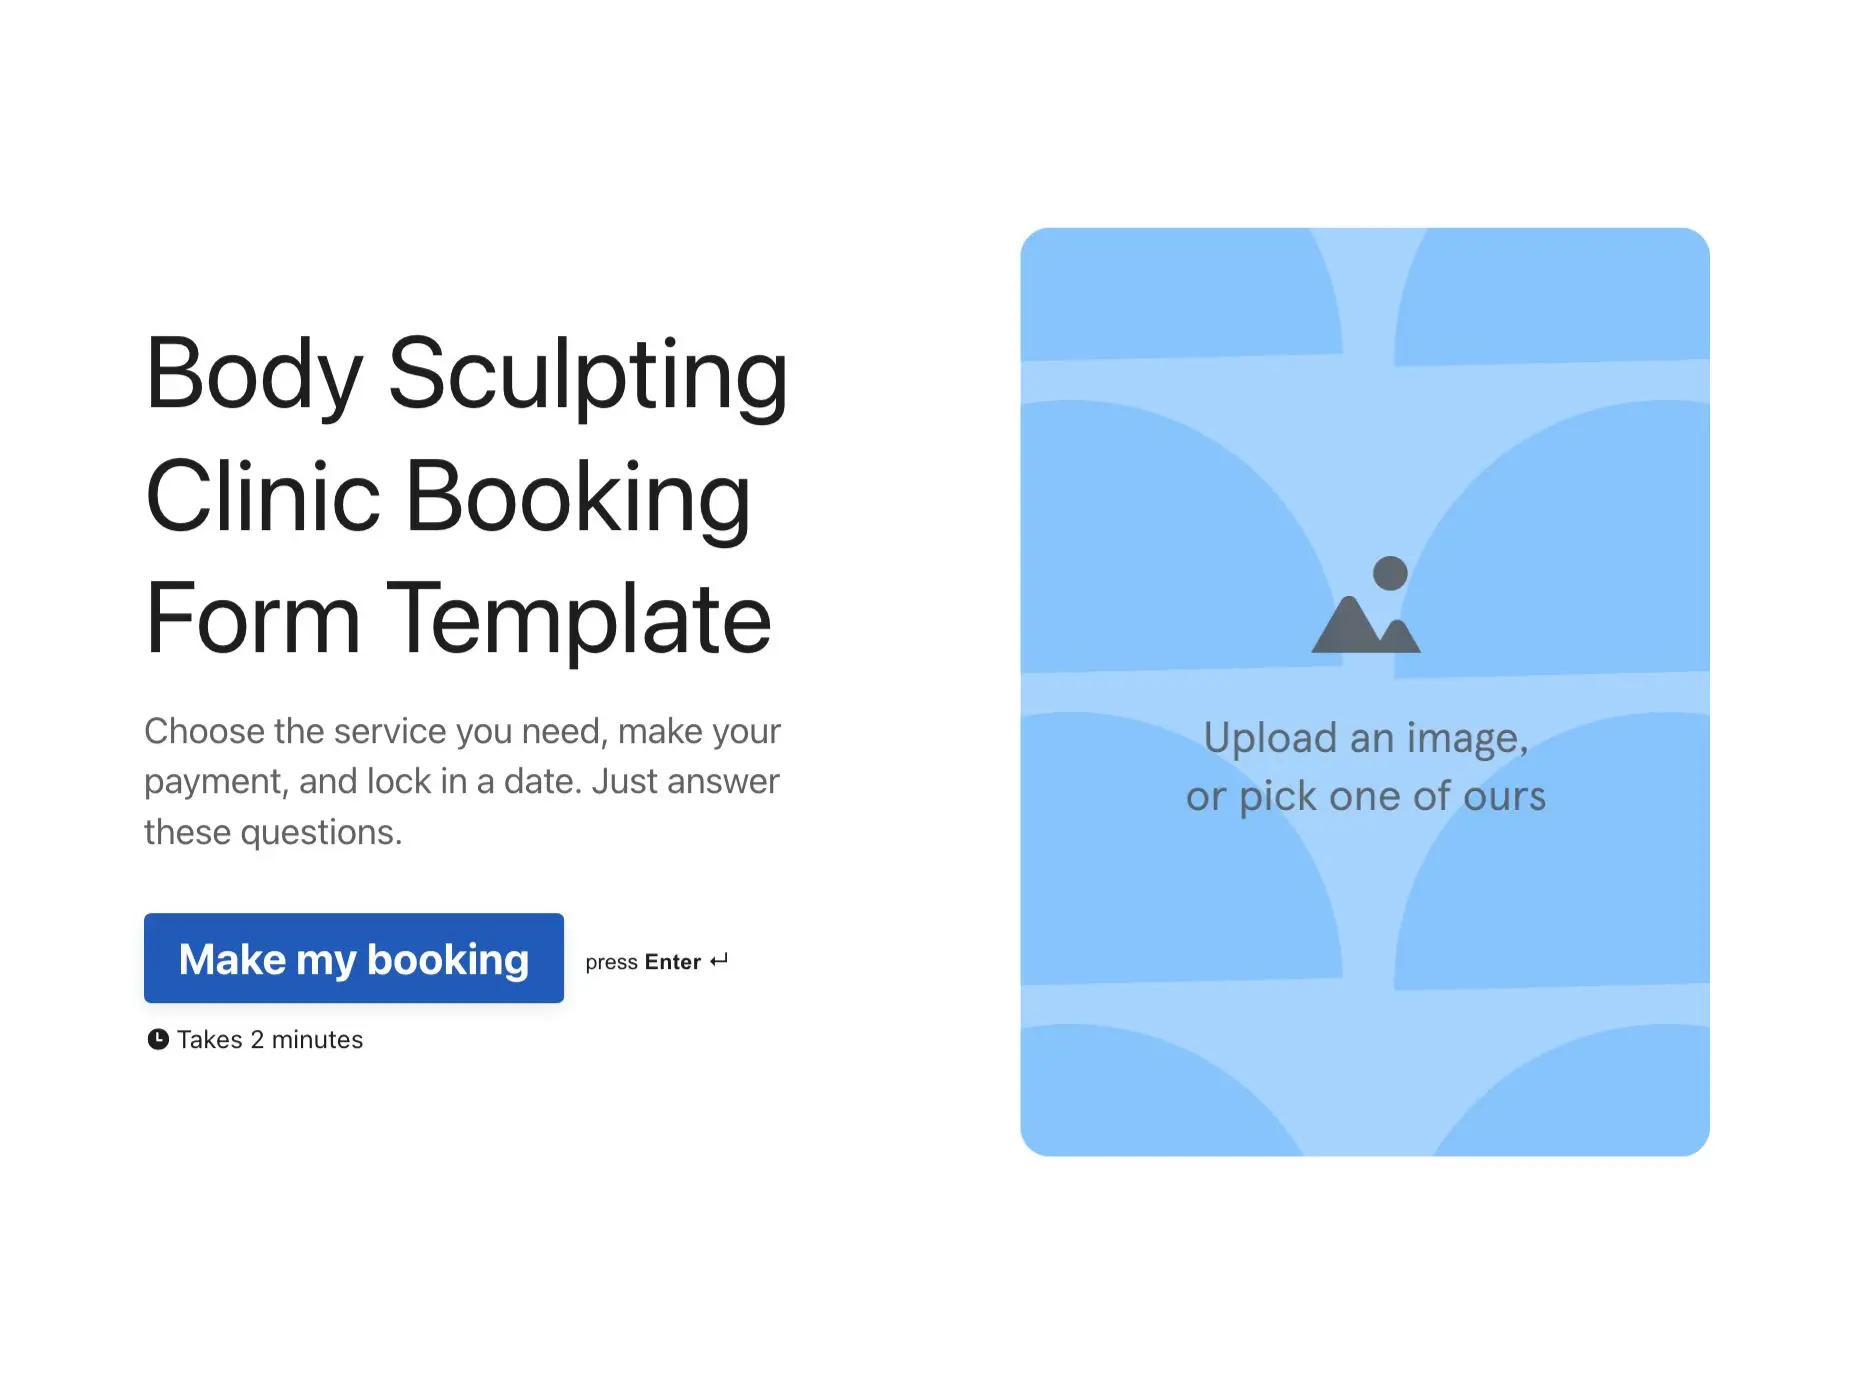 Body Sculpting Clinic Booking Form Template Hero